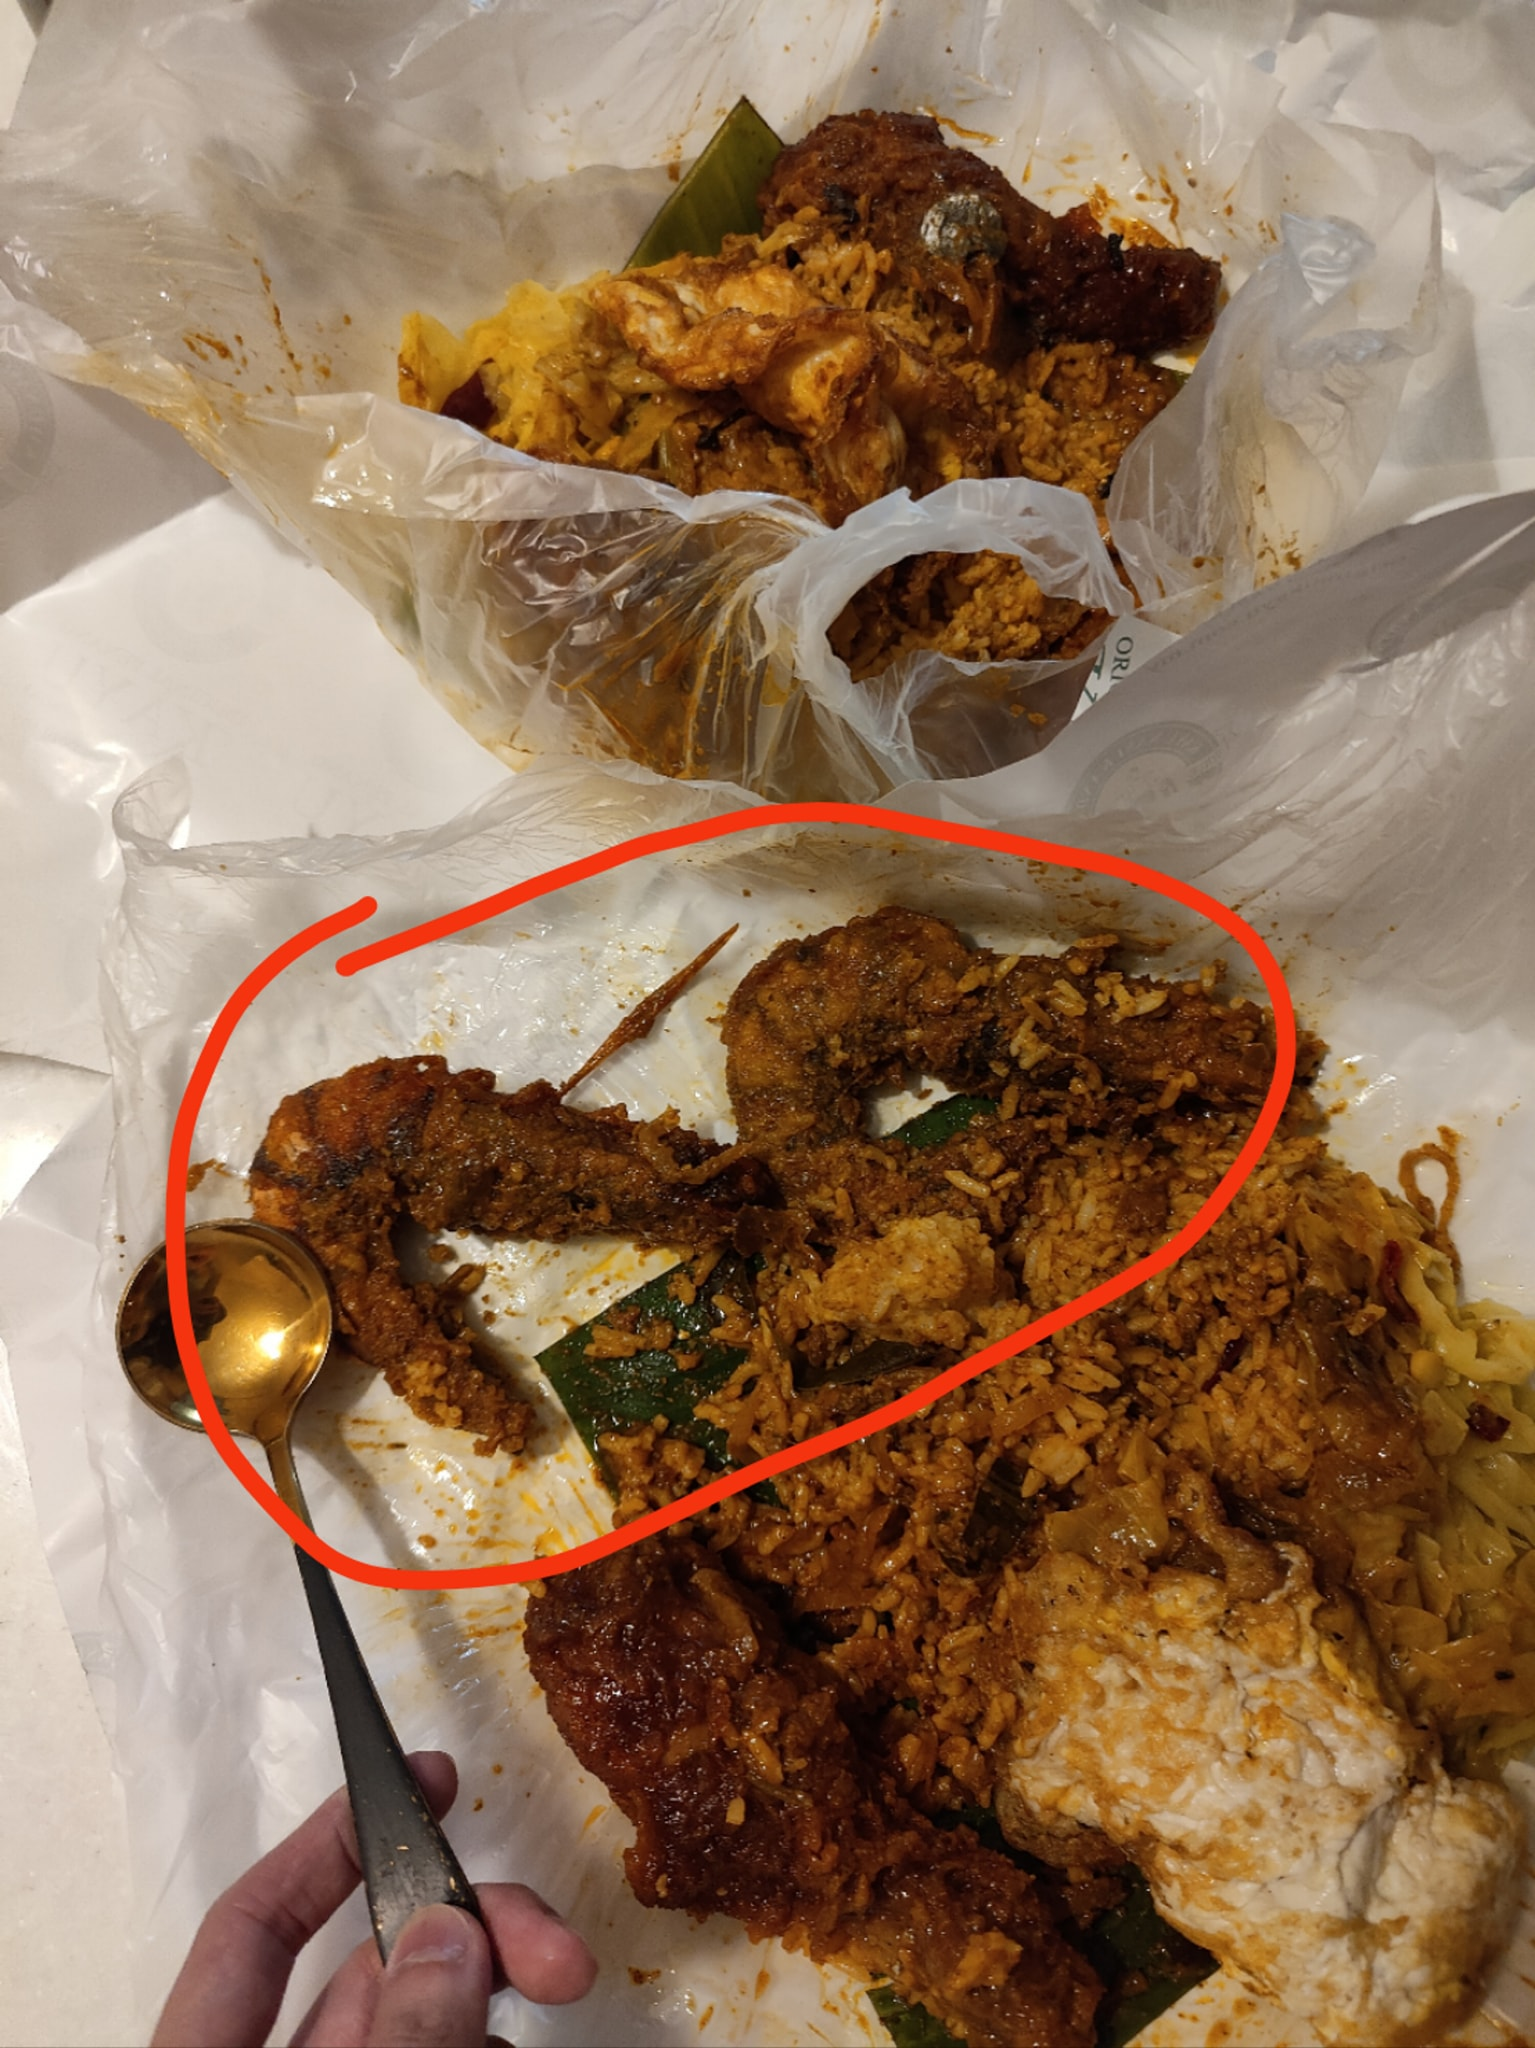 M'sian forks out rm89 for 2 plates of nasi kandar at famed pj mamak, spent rm40 on 2 prawns alone